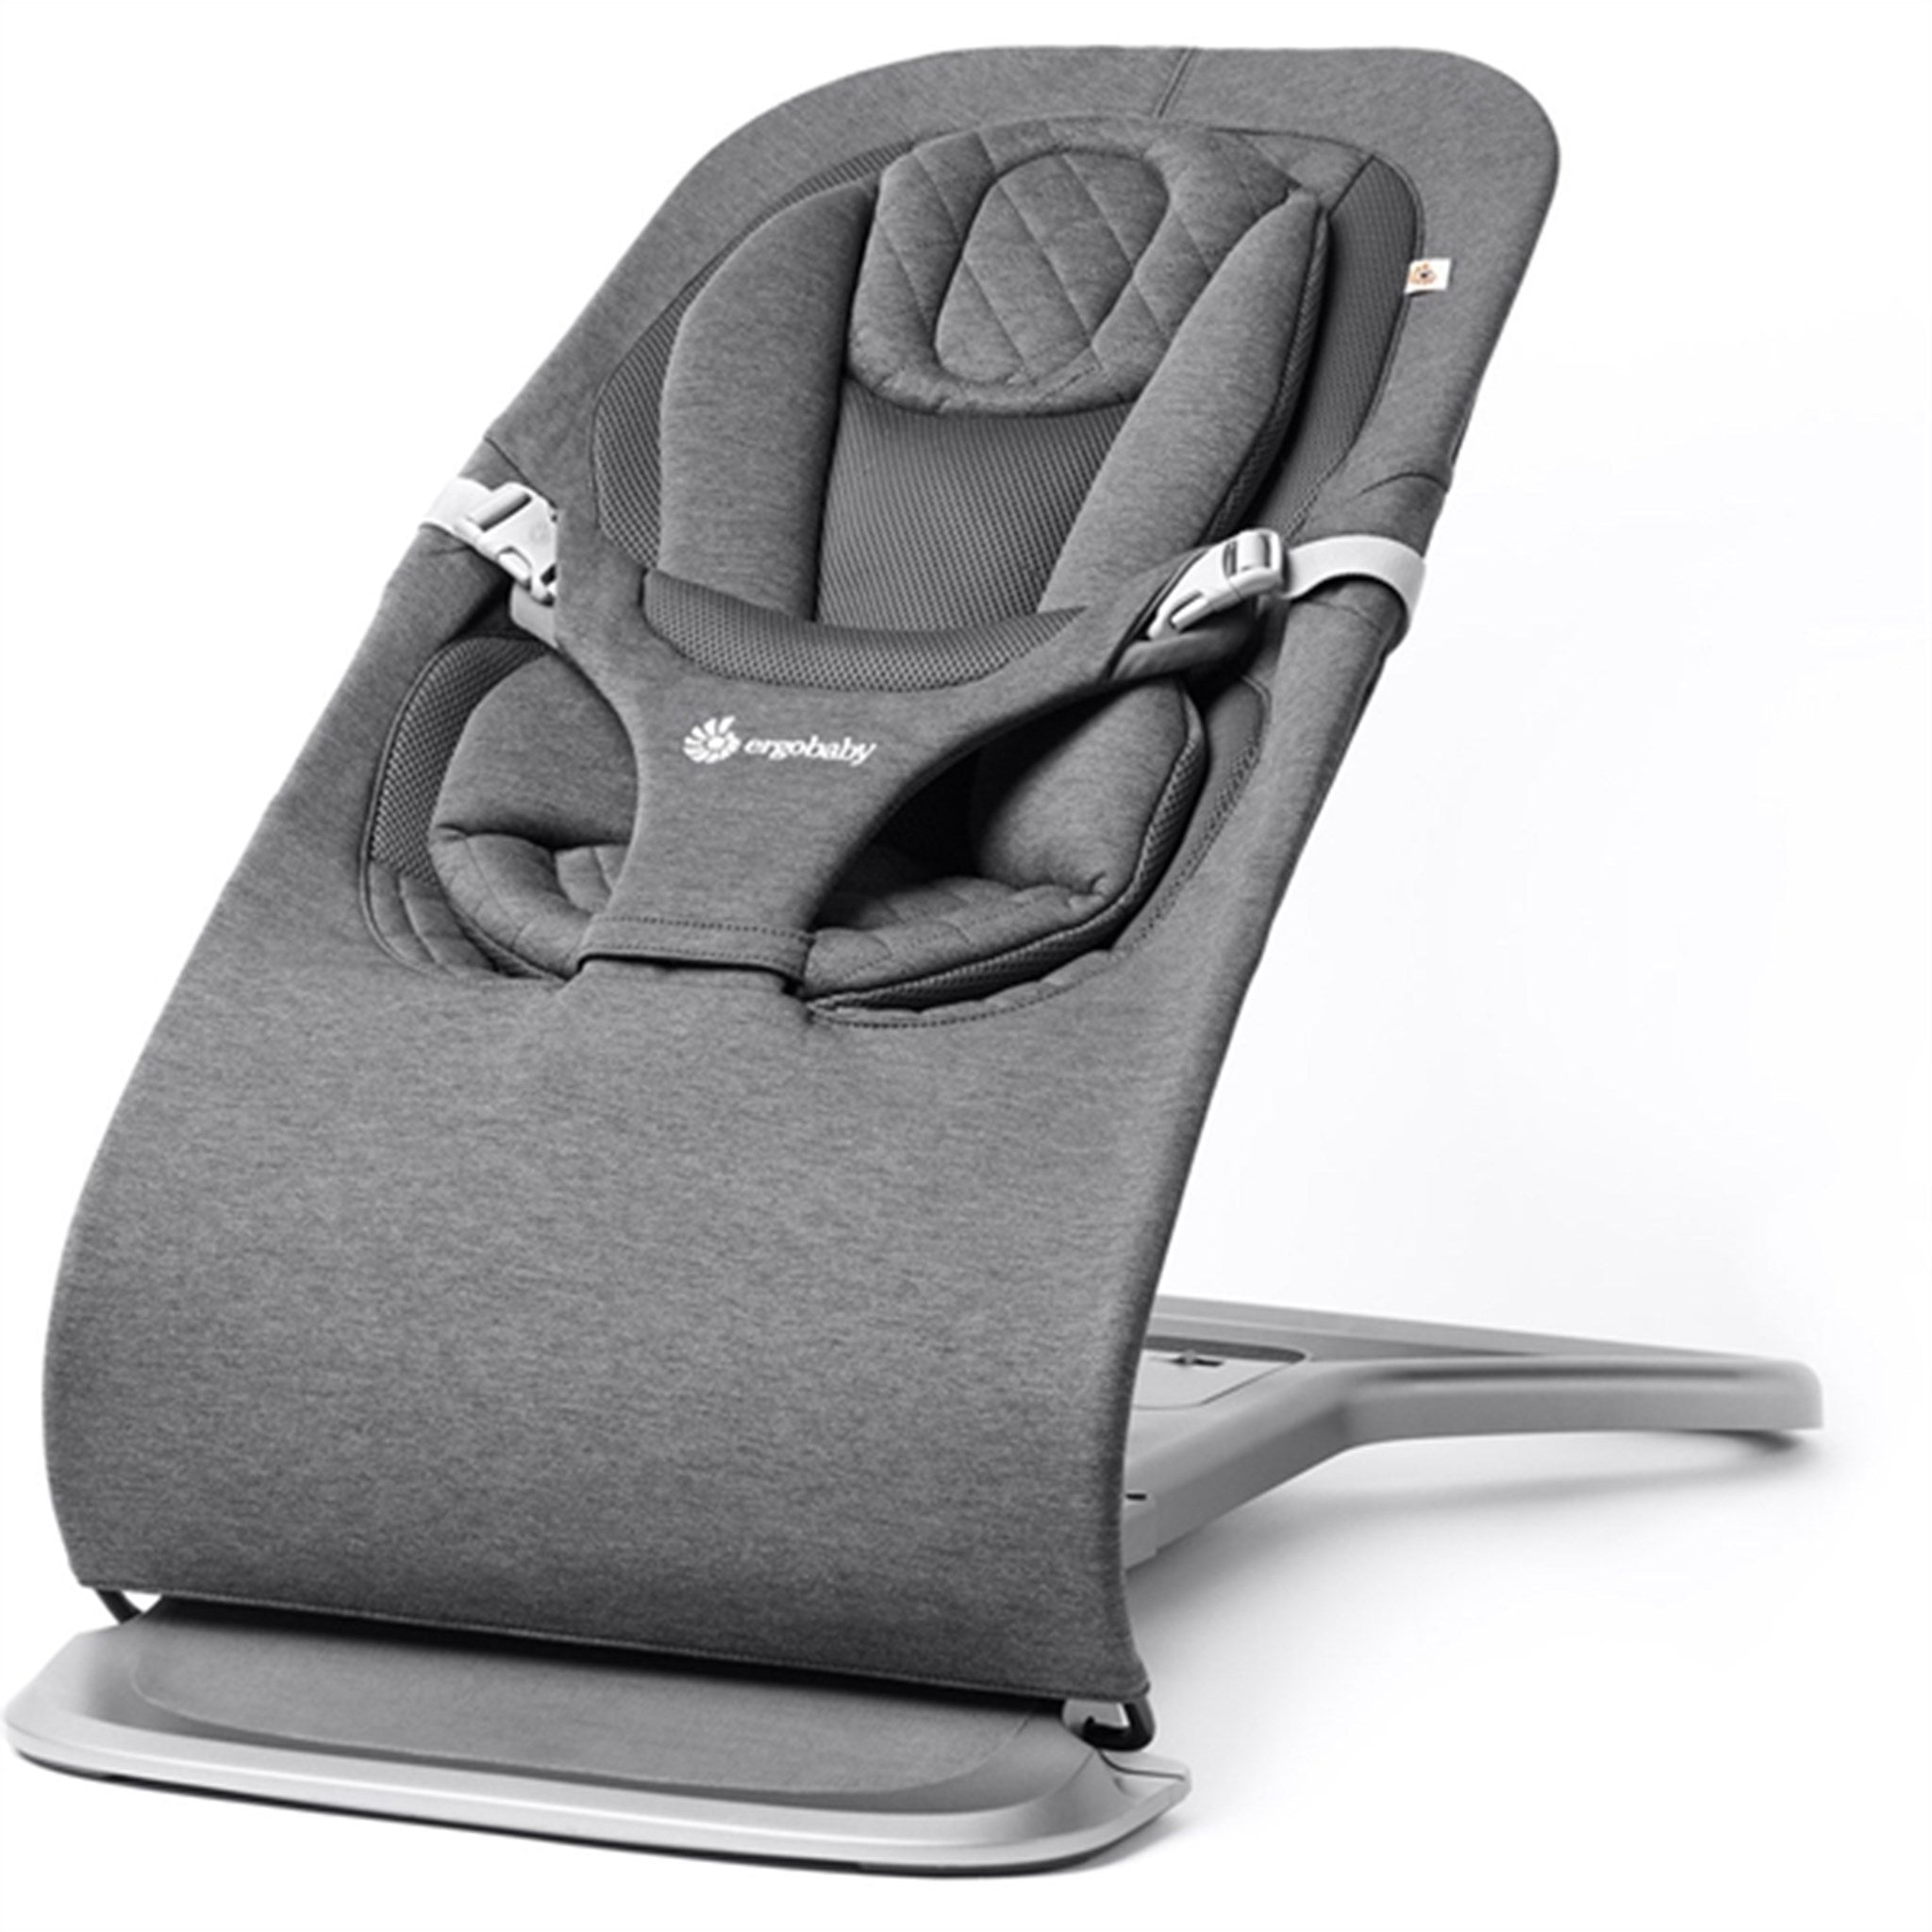 Ergobaby Evolve 3-in-1 Bouncer Charcoal Grey